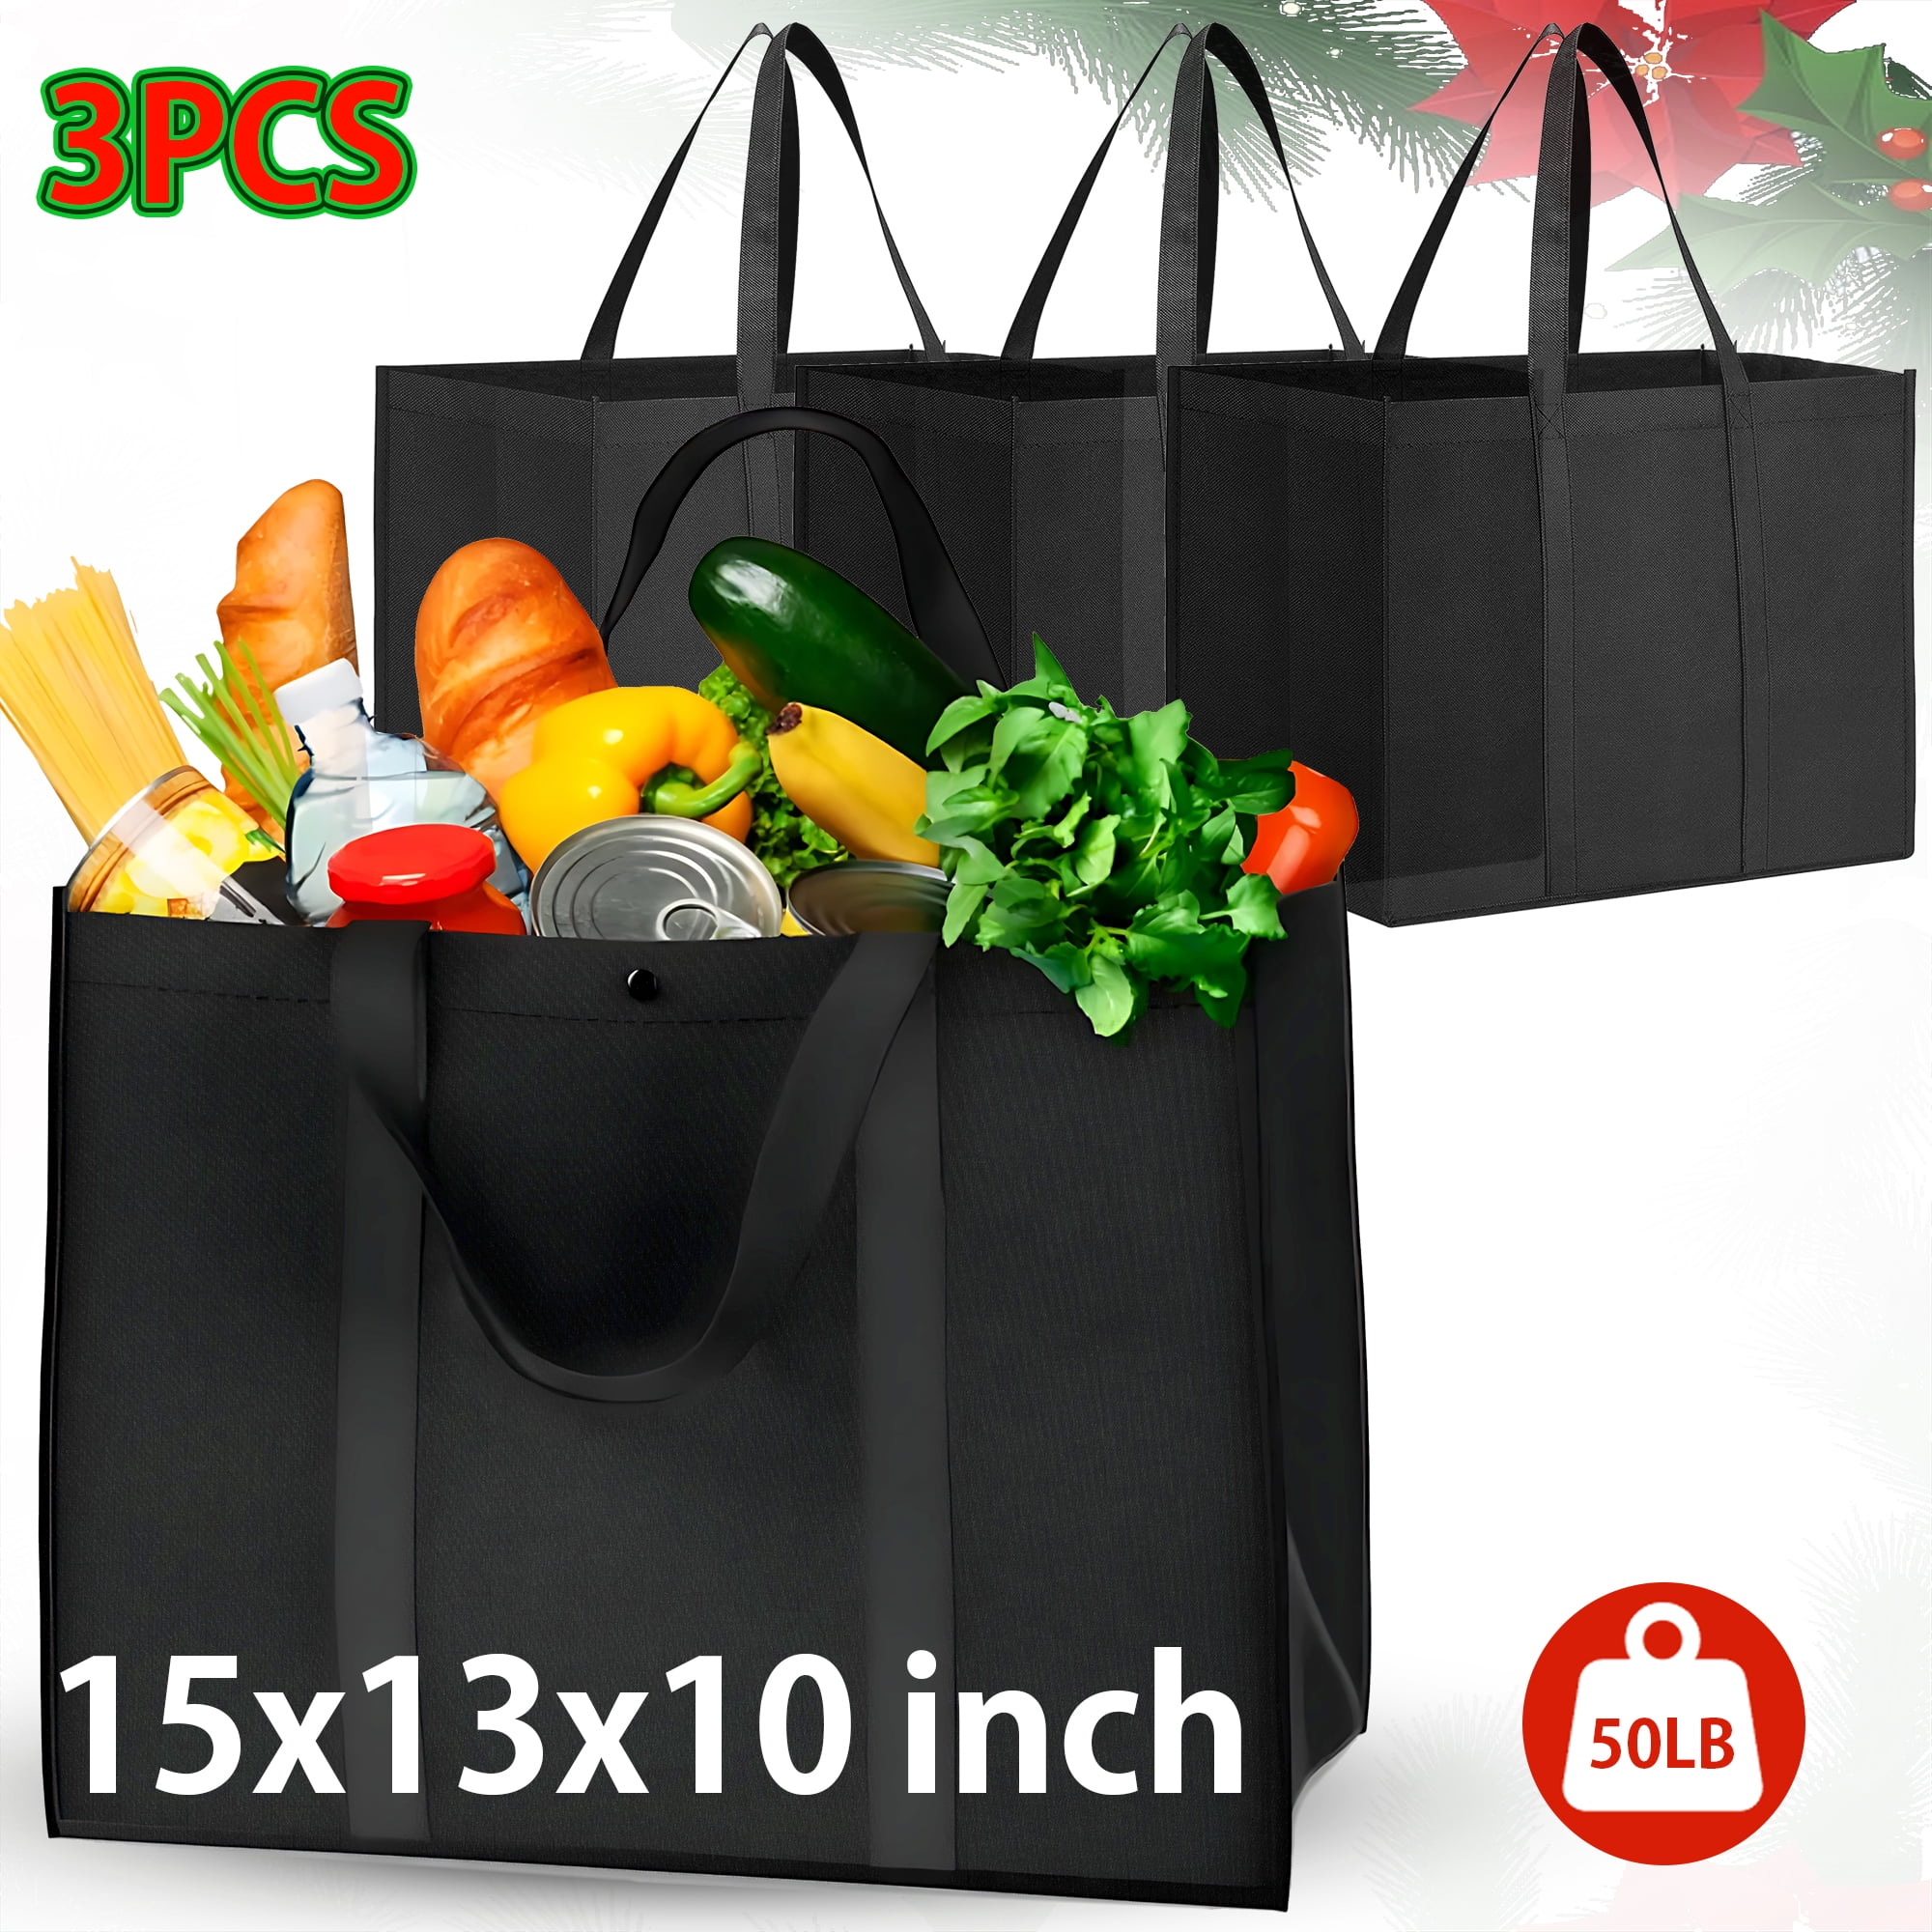 3 Pack Reusable Grocery Bags, Foldable Shopping Cart Bags, Washable Large  Storage Reusable Bags, Grocery Tote Bag with Reinforced Handles & Thick